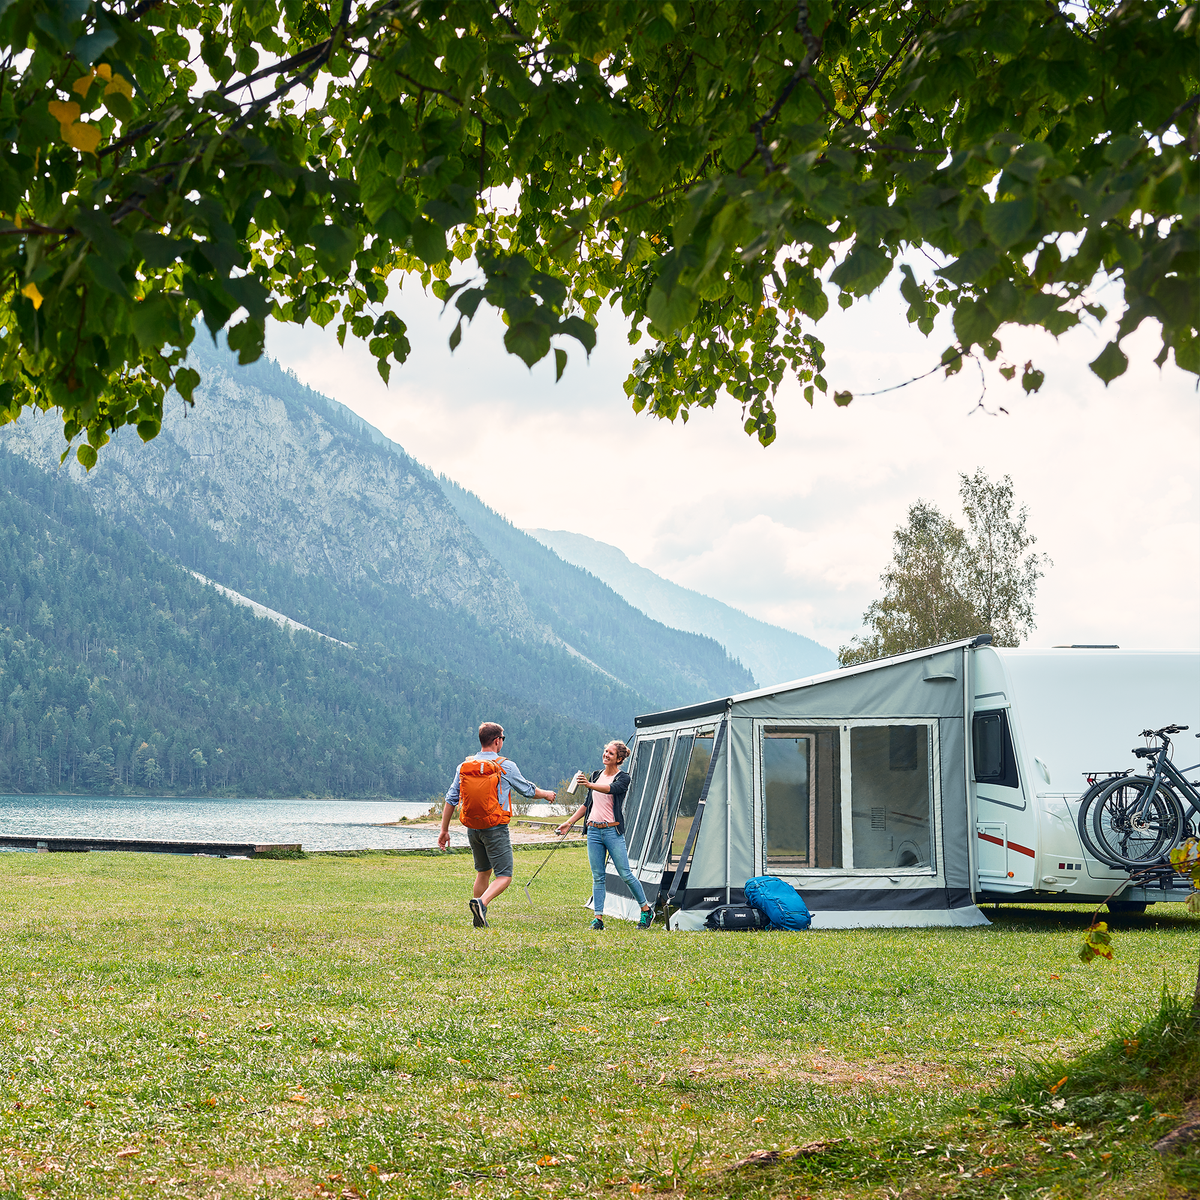 A motorhome parked by a mountain and lake and people stand by a Thule Veduta rv awning tent.